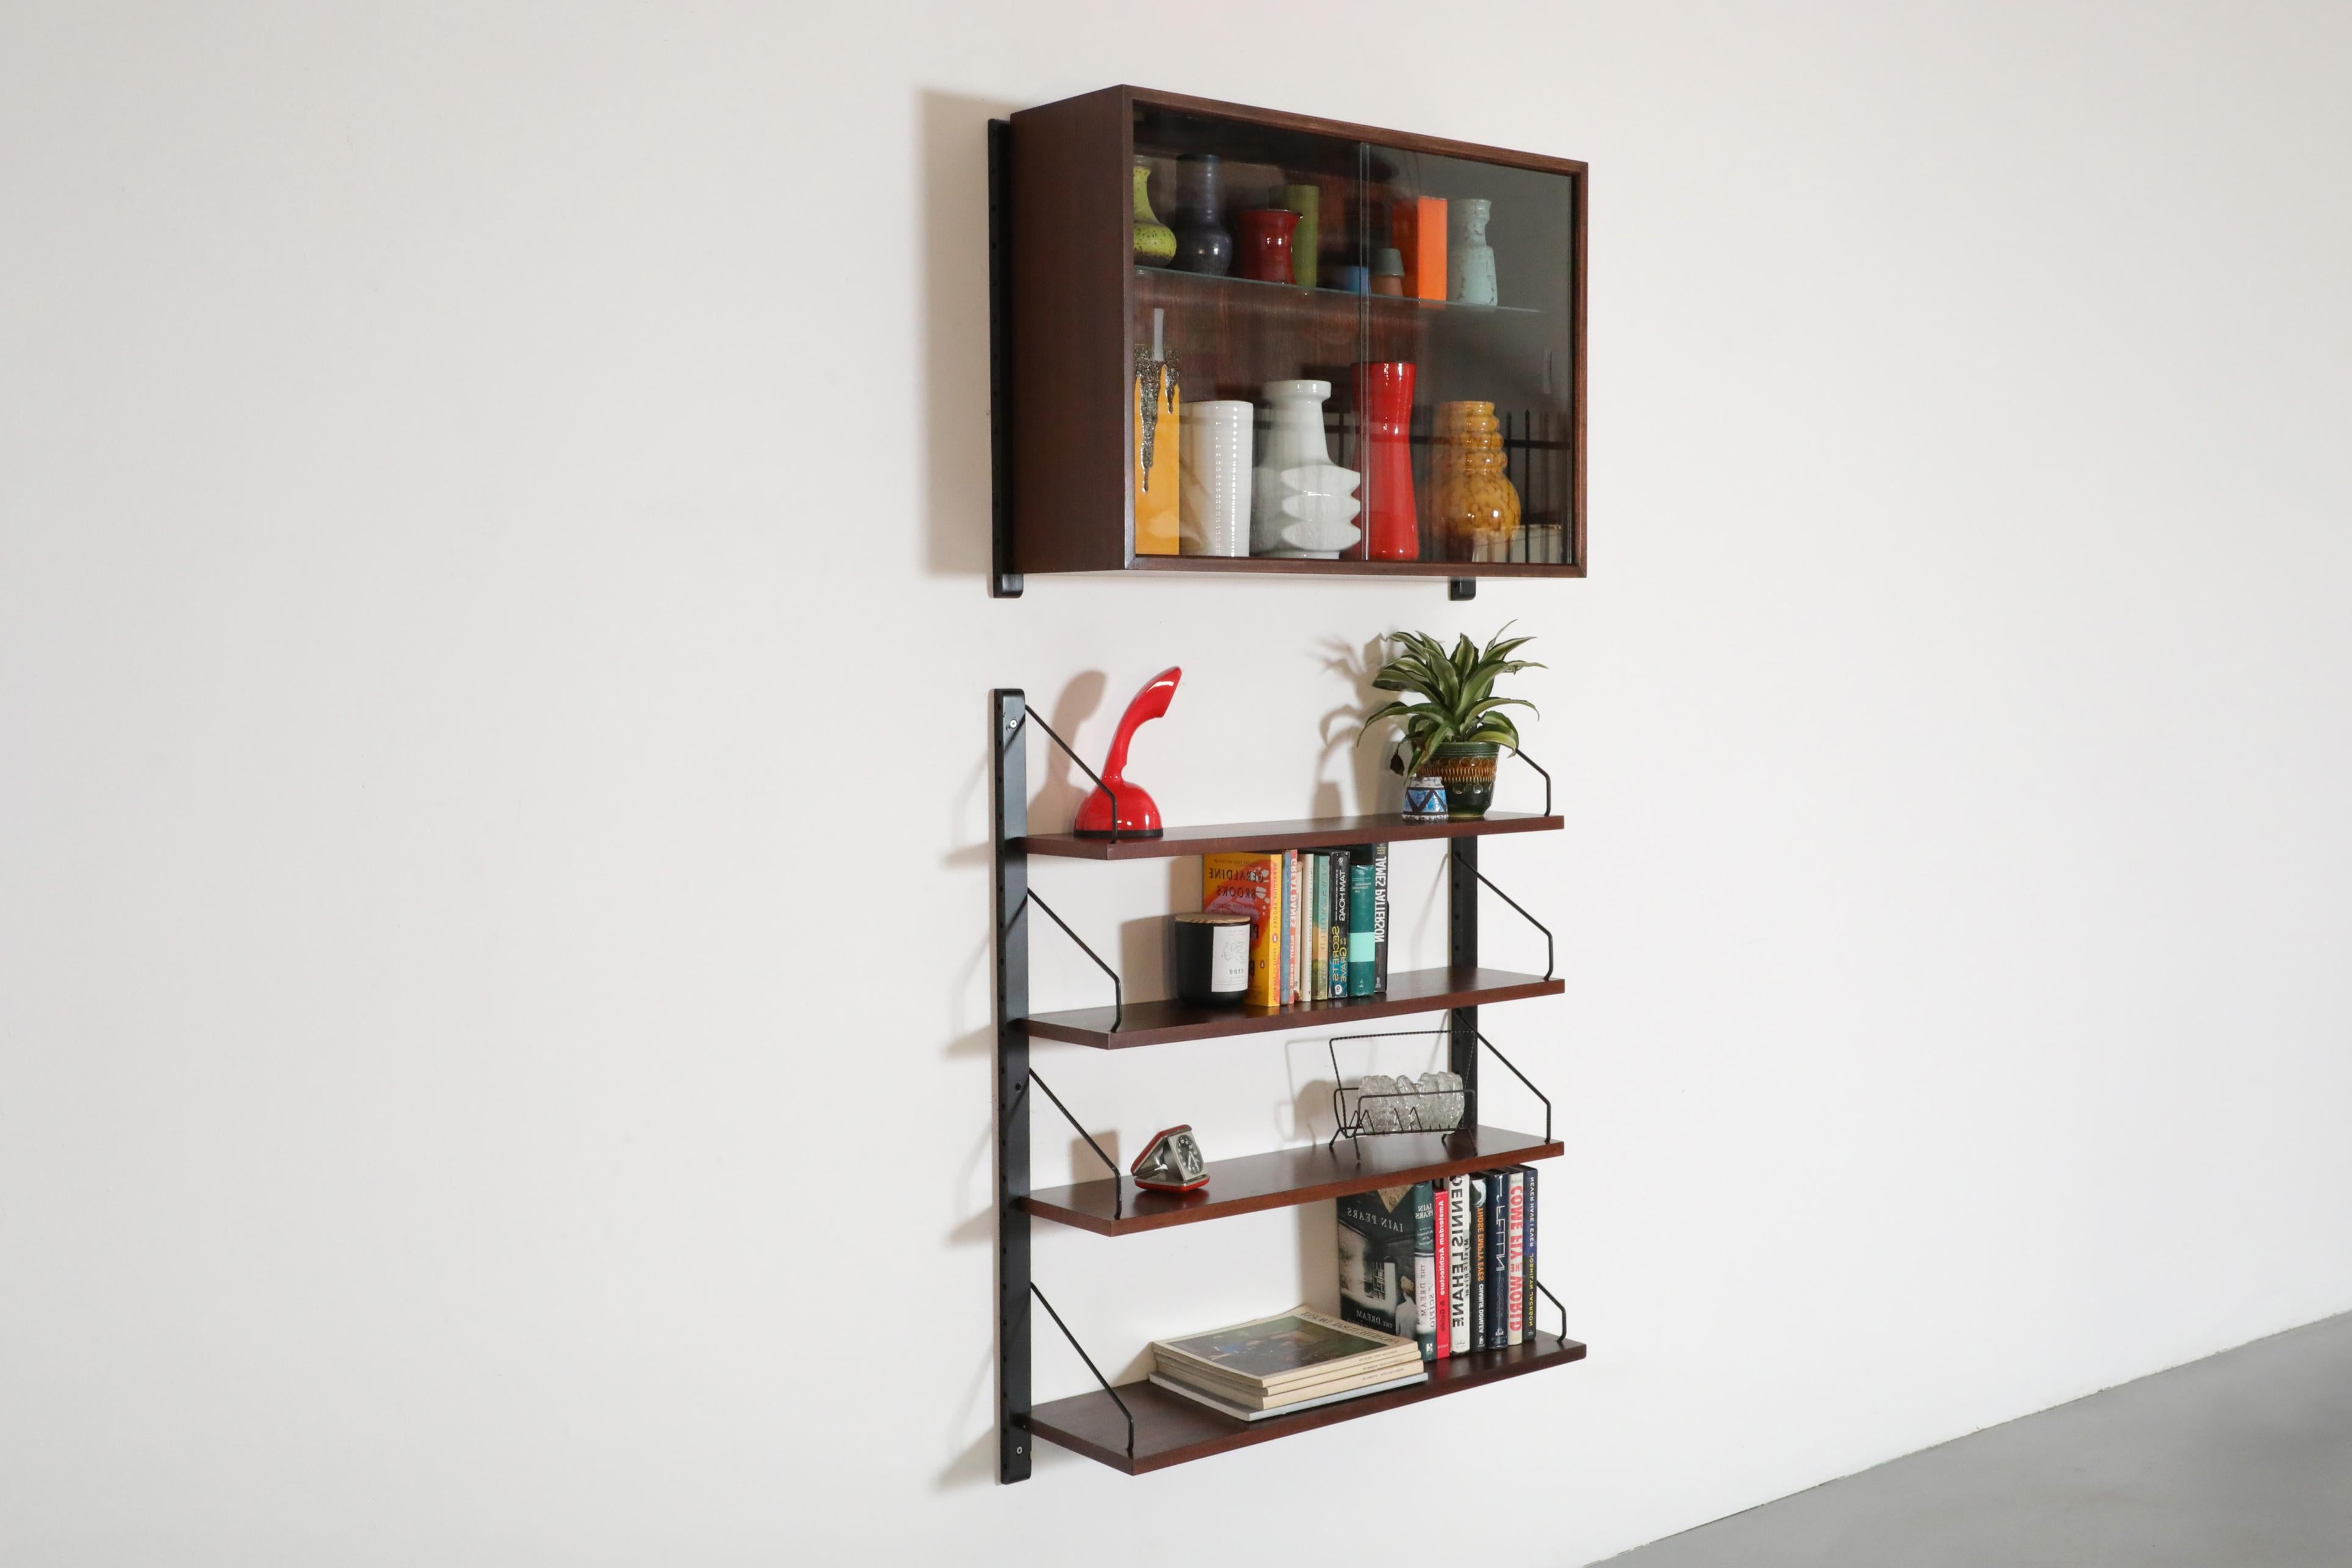 An interchangeable Poul Cadovius rosewood wall mounted Royal System with shelving, black risers and a cabinet with glass doors and shelf. This can be a multi-section unit as well. The cabinet (32.125